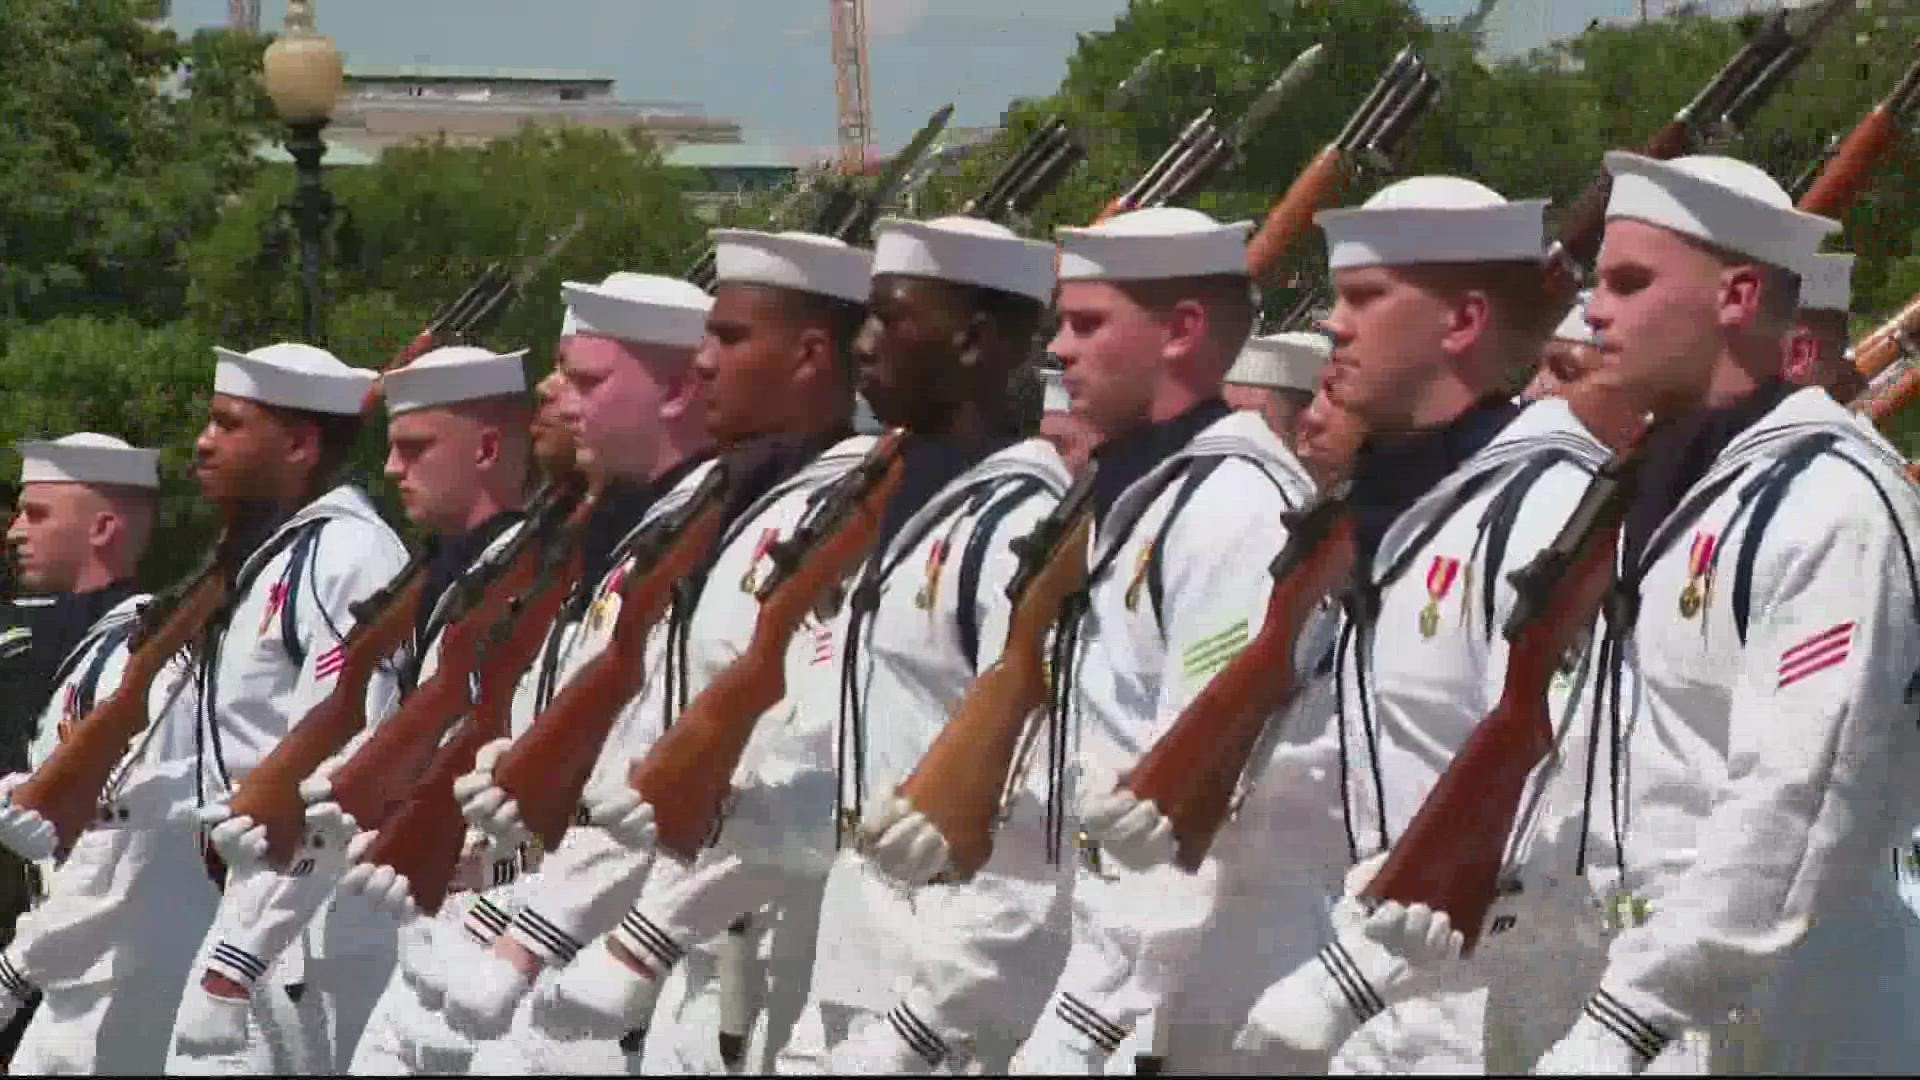 The Memorial Day Parade returned to DC for the first time since the start of the COVID-19 pandemic.